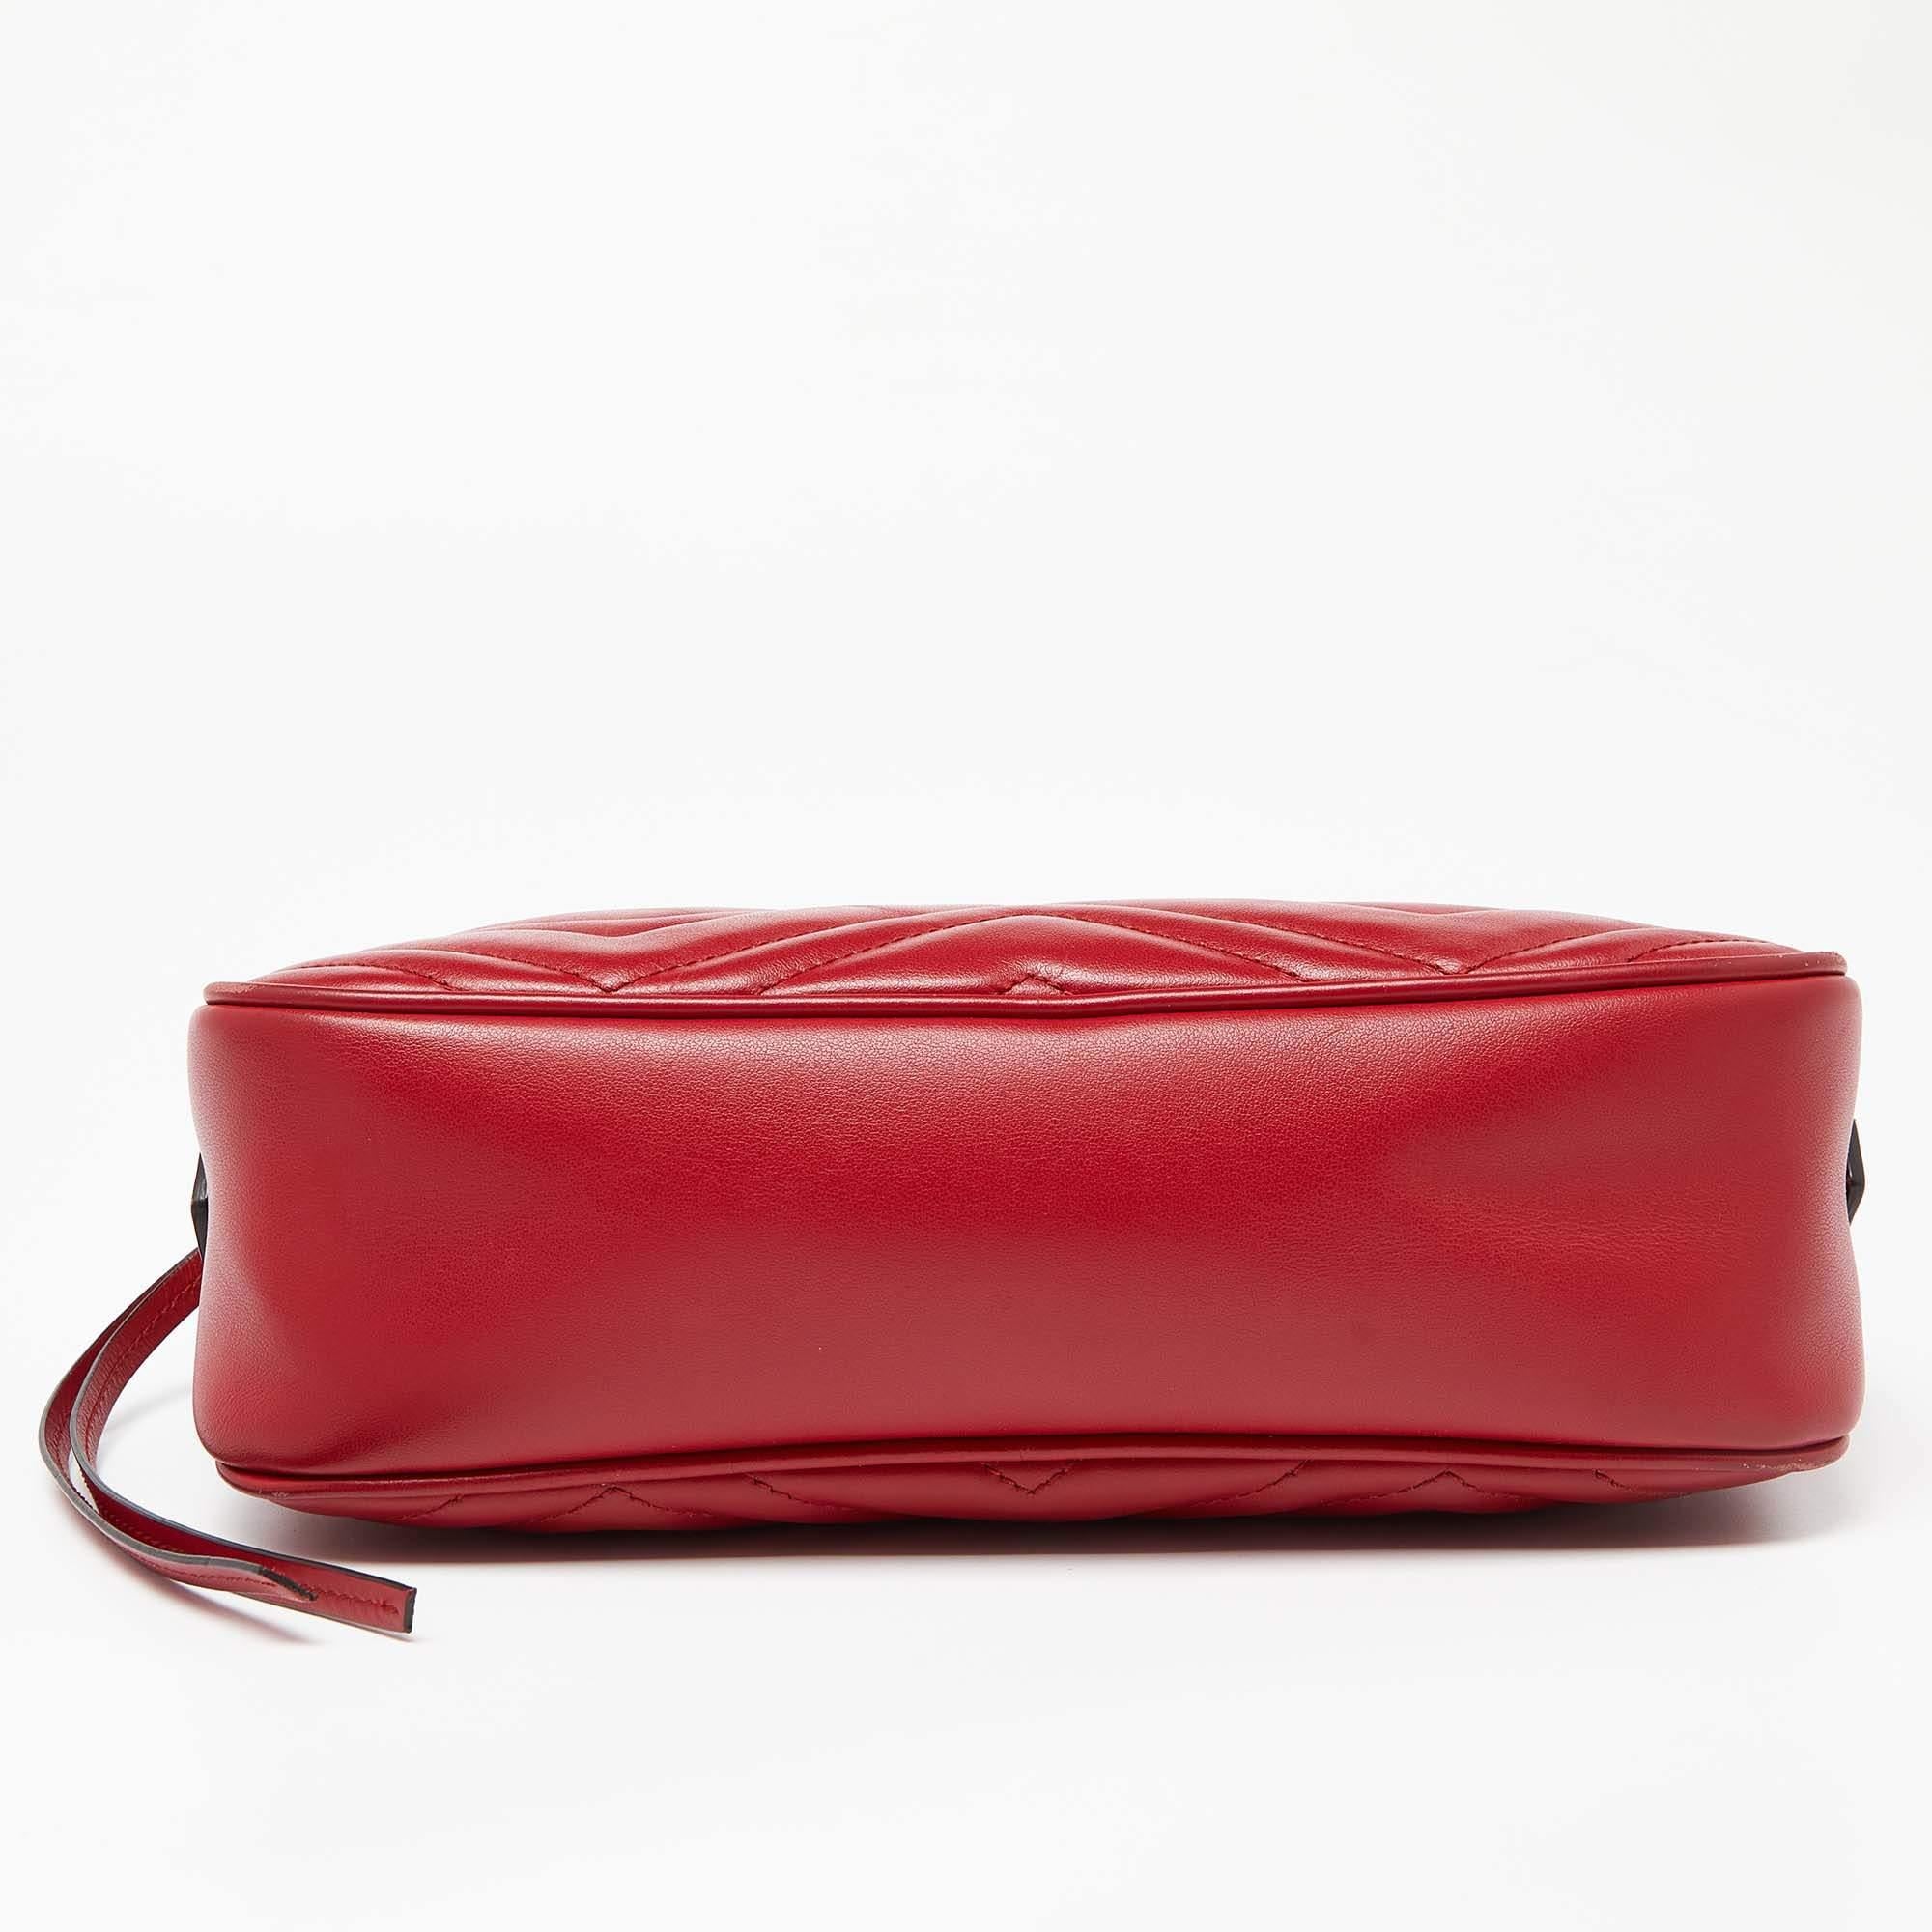 Gucci Red Matelassé Leather Small GG Marmont Shoulder Bag For Sale 1